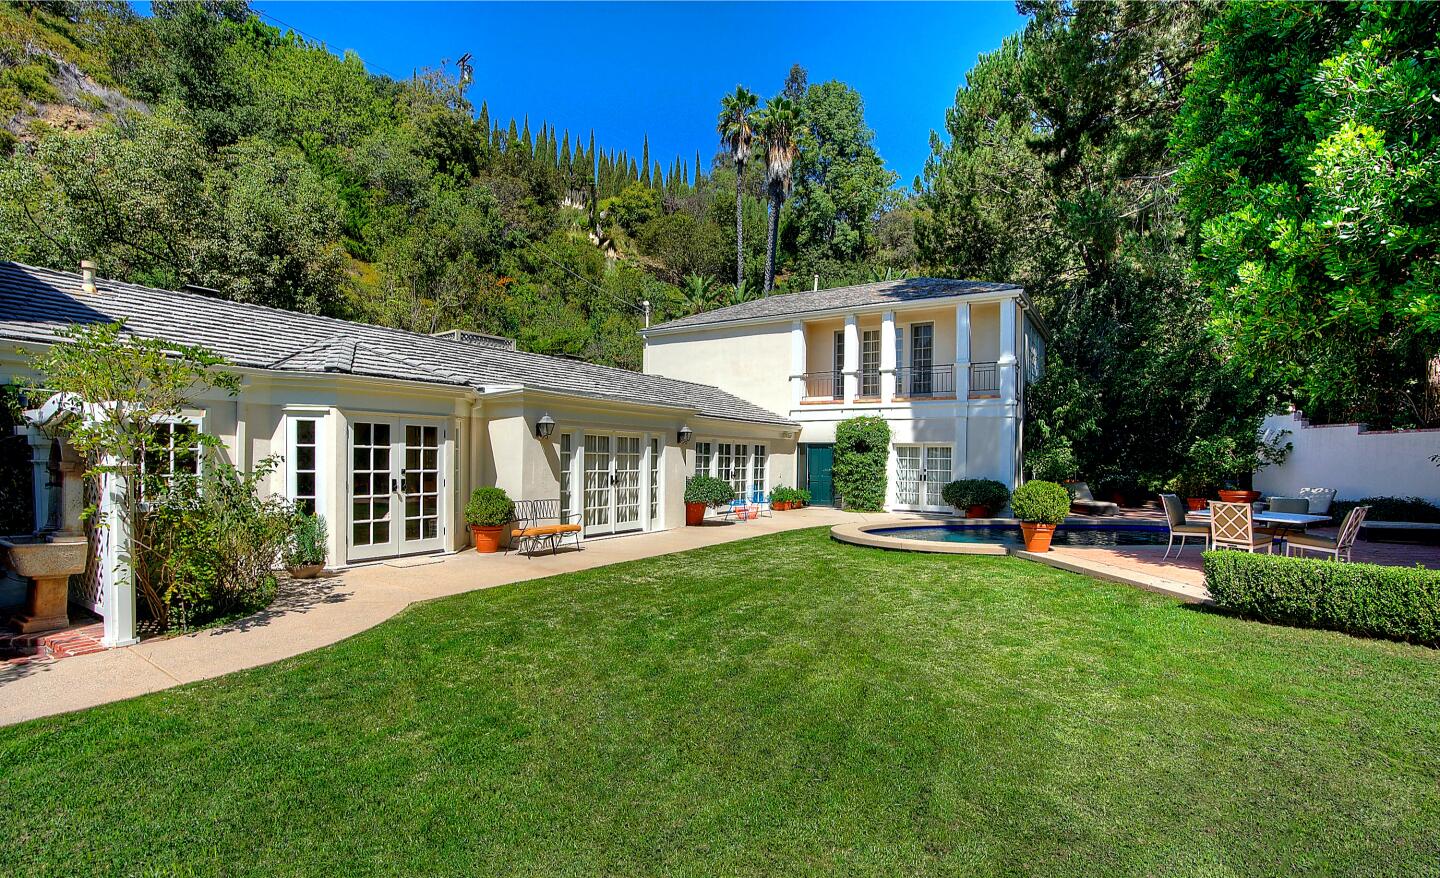 Katy Perry's Beverly Hills home